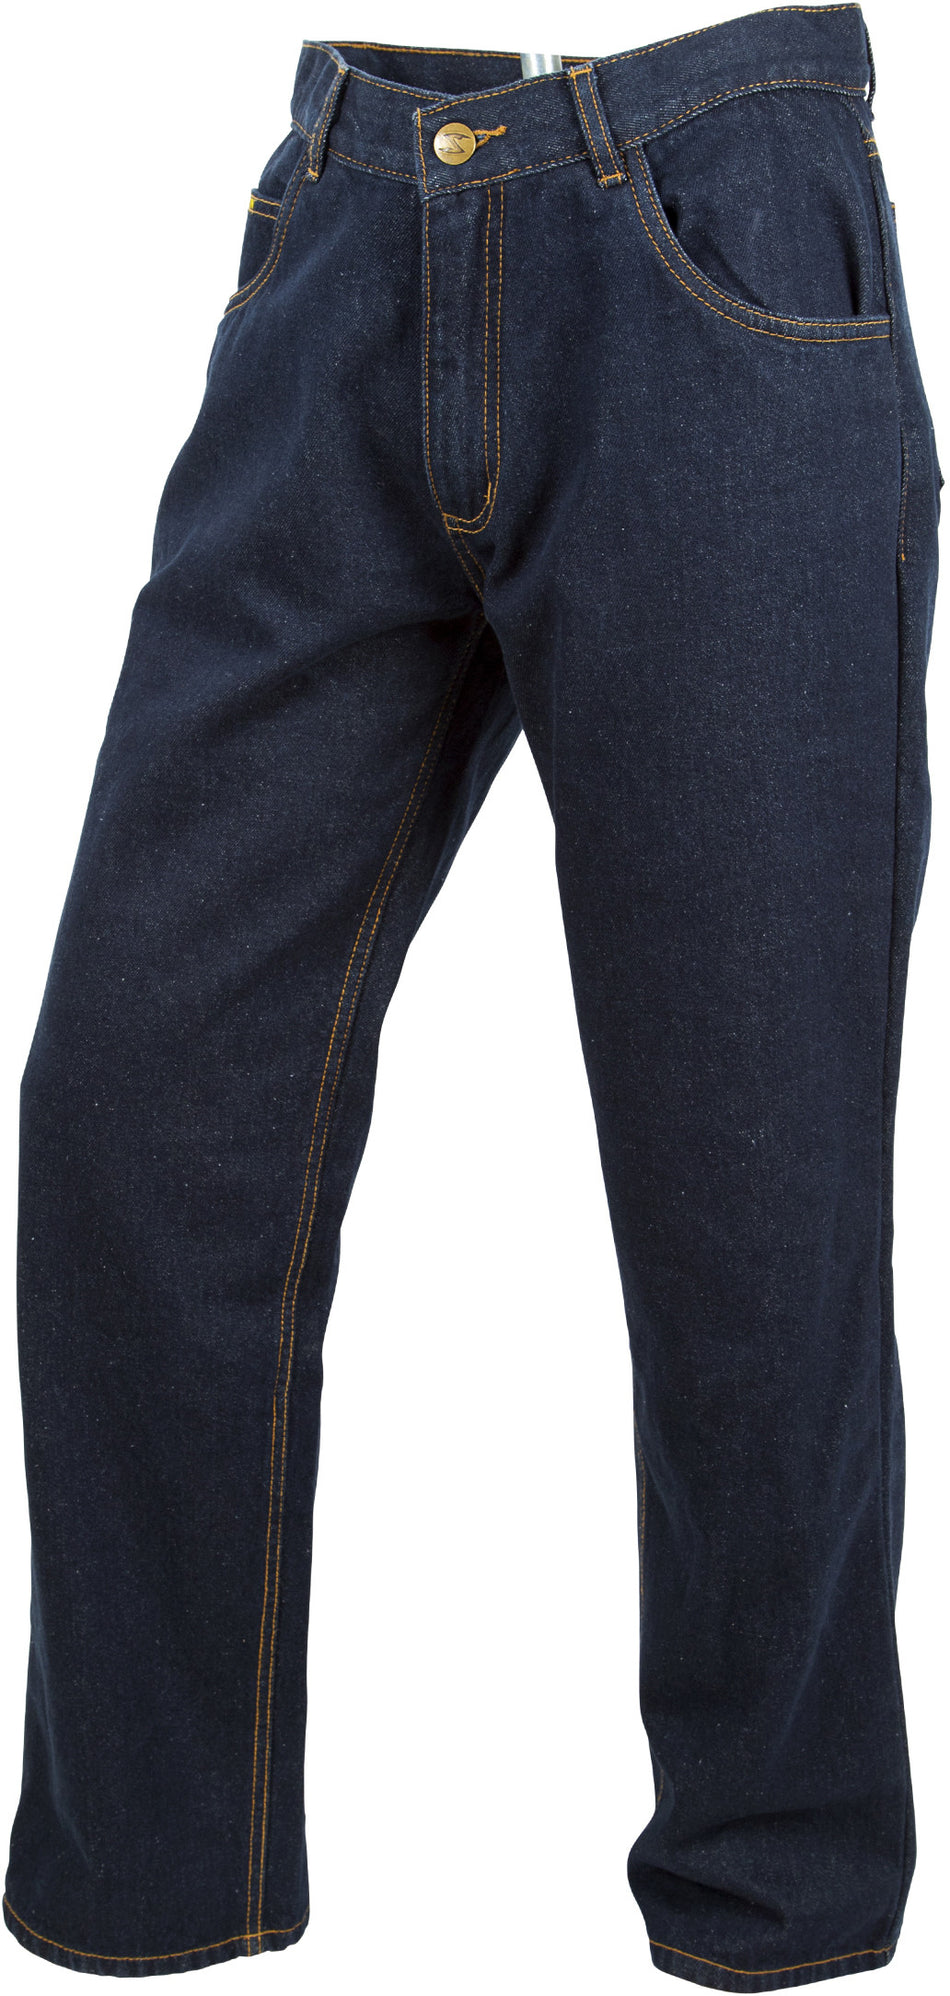 SCORPION EXO Covert Jeans Blue Size 36 2502-36